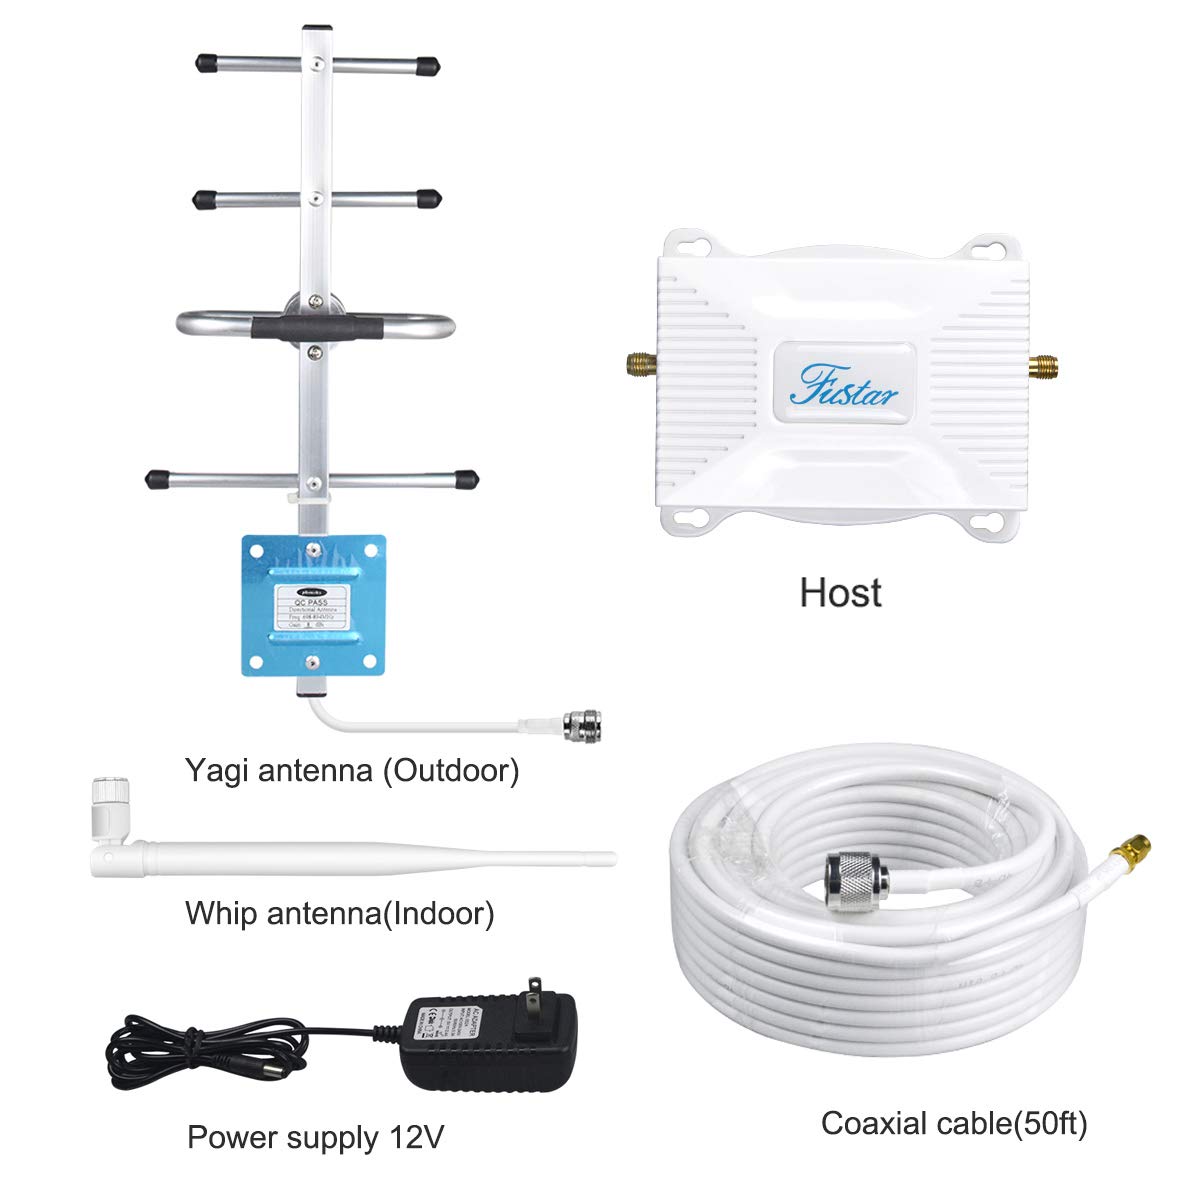 Verizon Cell Phone Signal Booster 4G LTE Band 13 700Mhz FDD Verizon Cell Signal Booster Repeater Signal Amplifier Enhance Data and Voice BOSURU Home Use with Antenna Kits Support Multiple Devices 